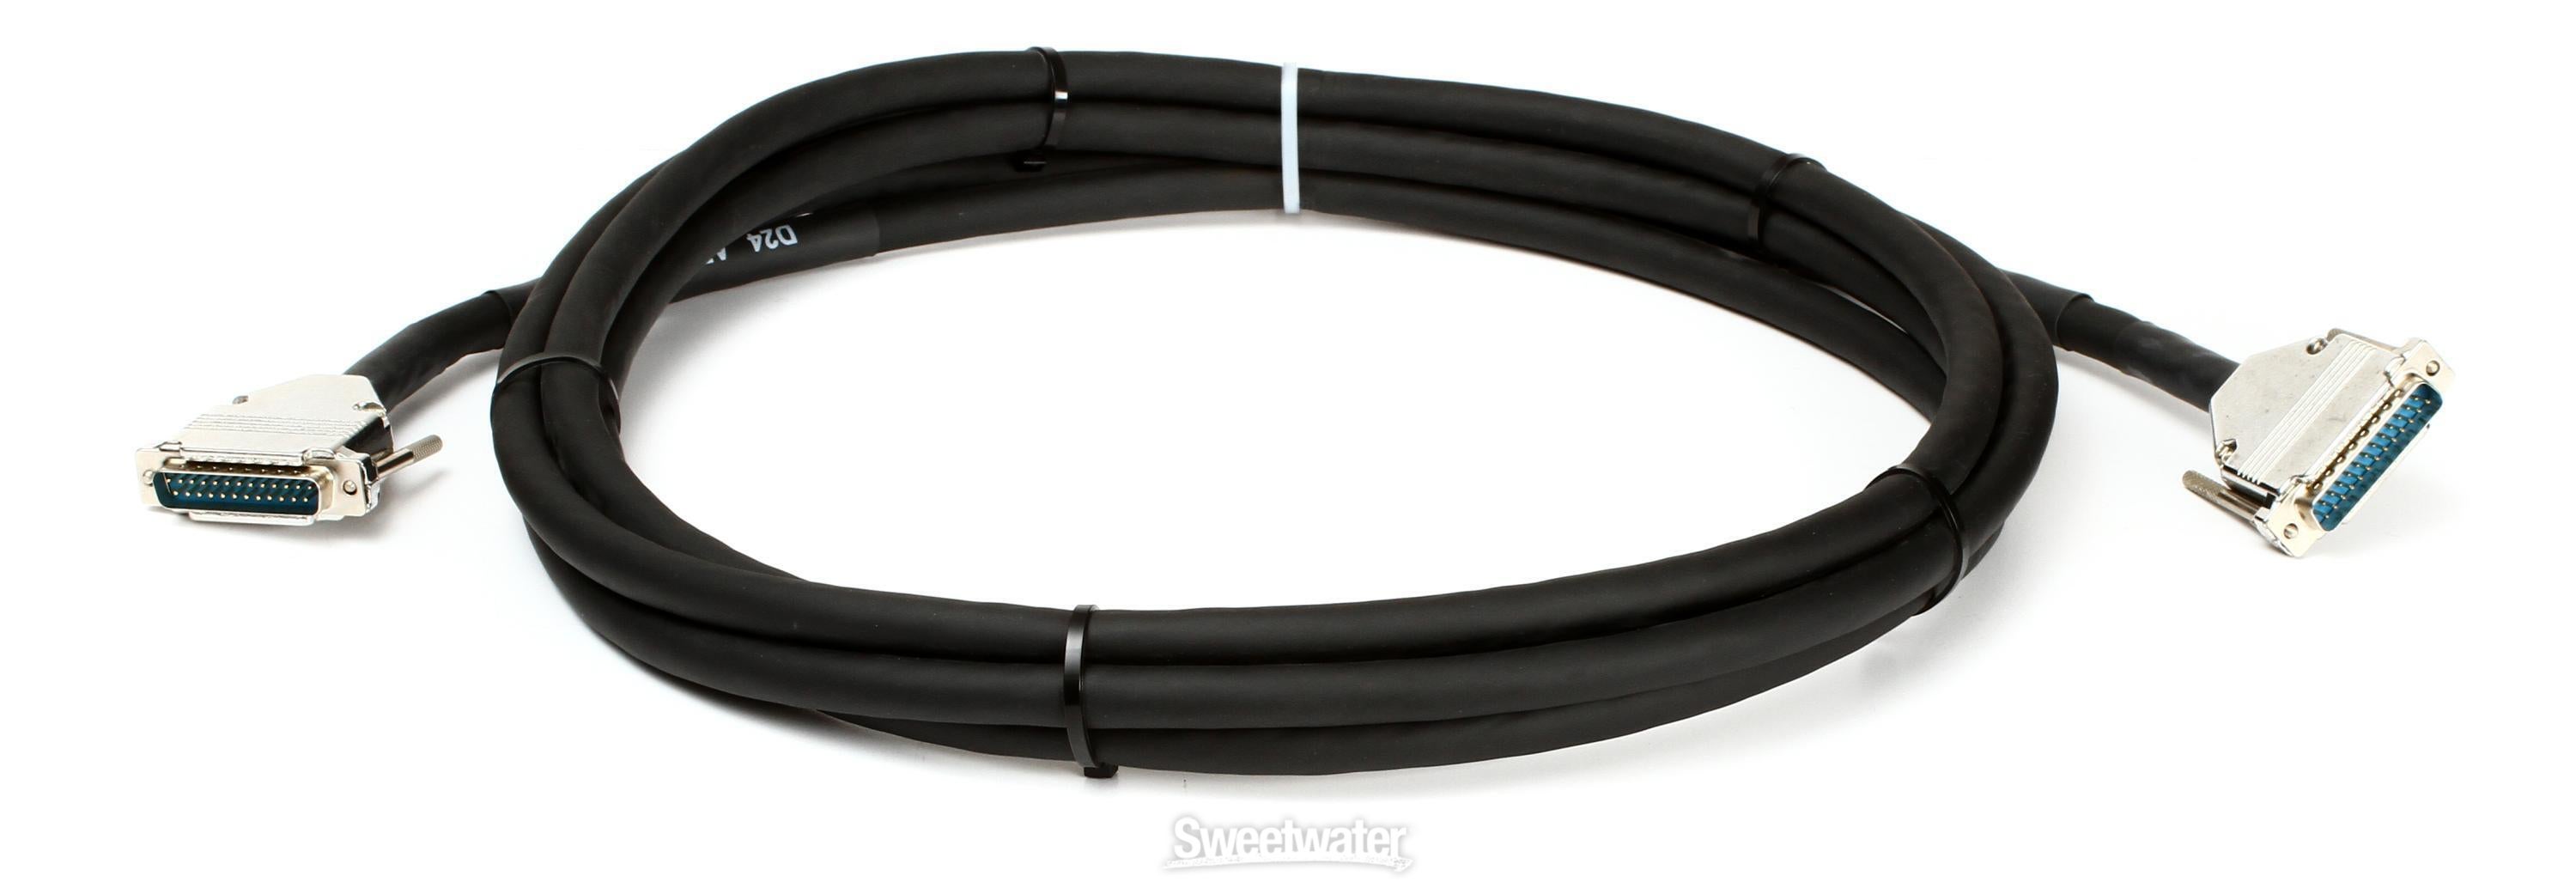 Yamaha D24-AES Cable - 15' | Sweetwater